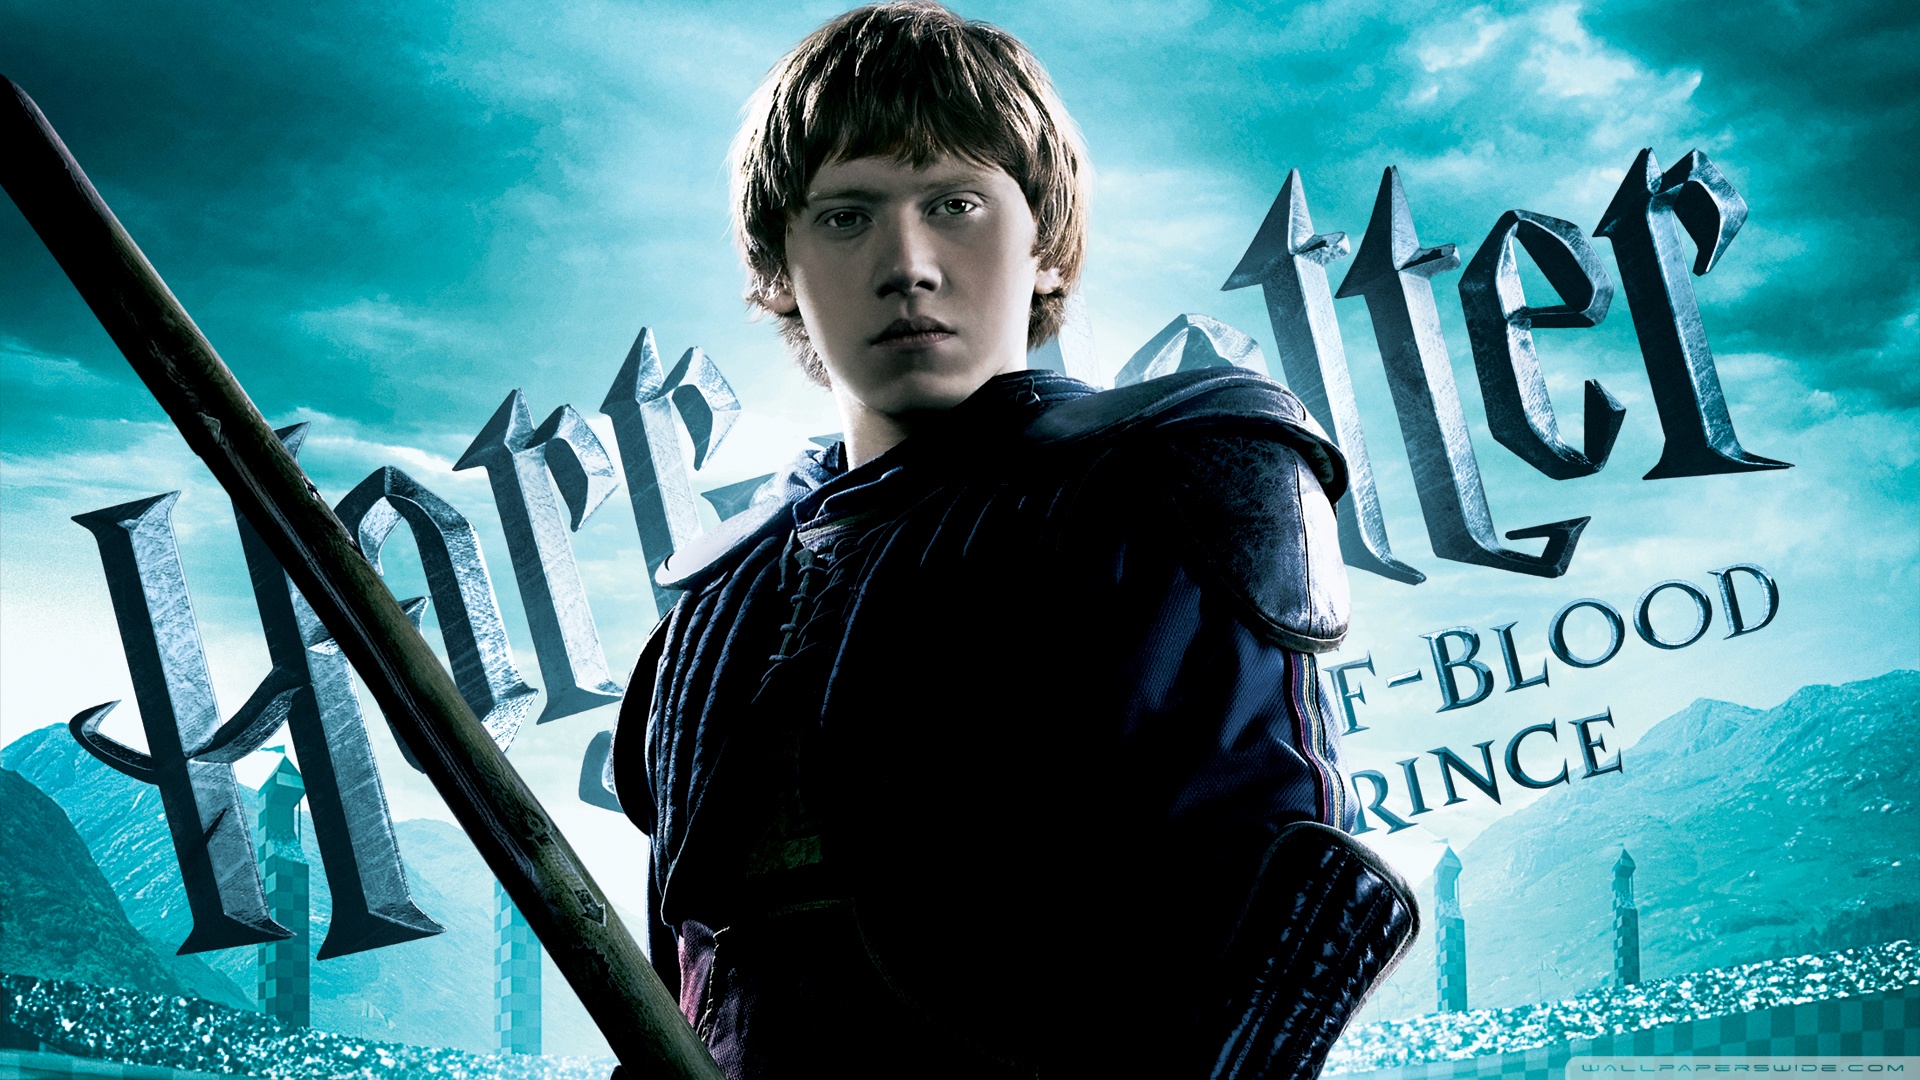 Harry Potter And The Half Blood Prince 1080p izle